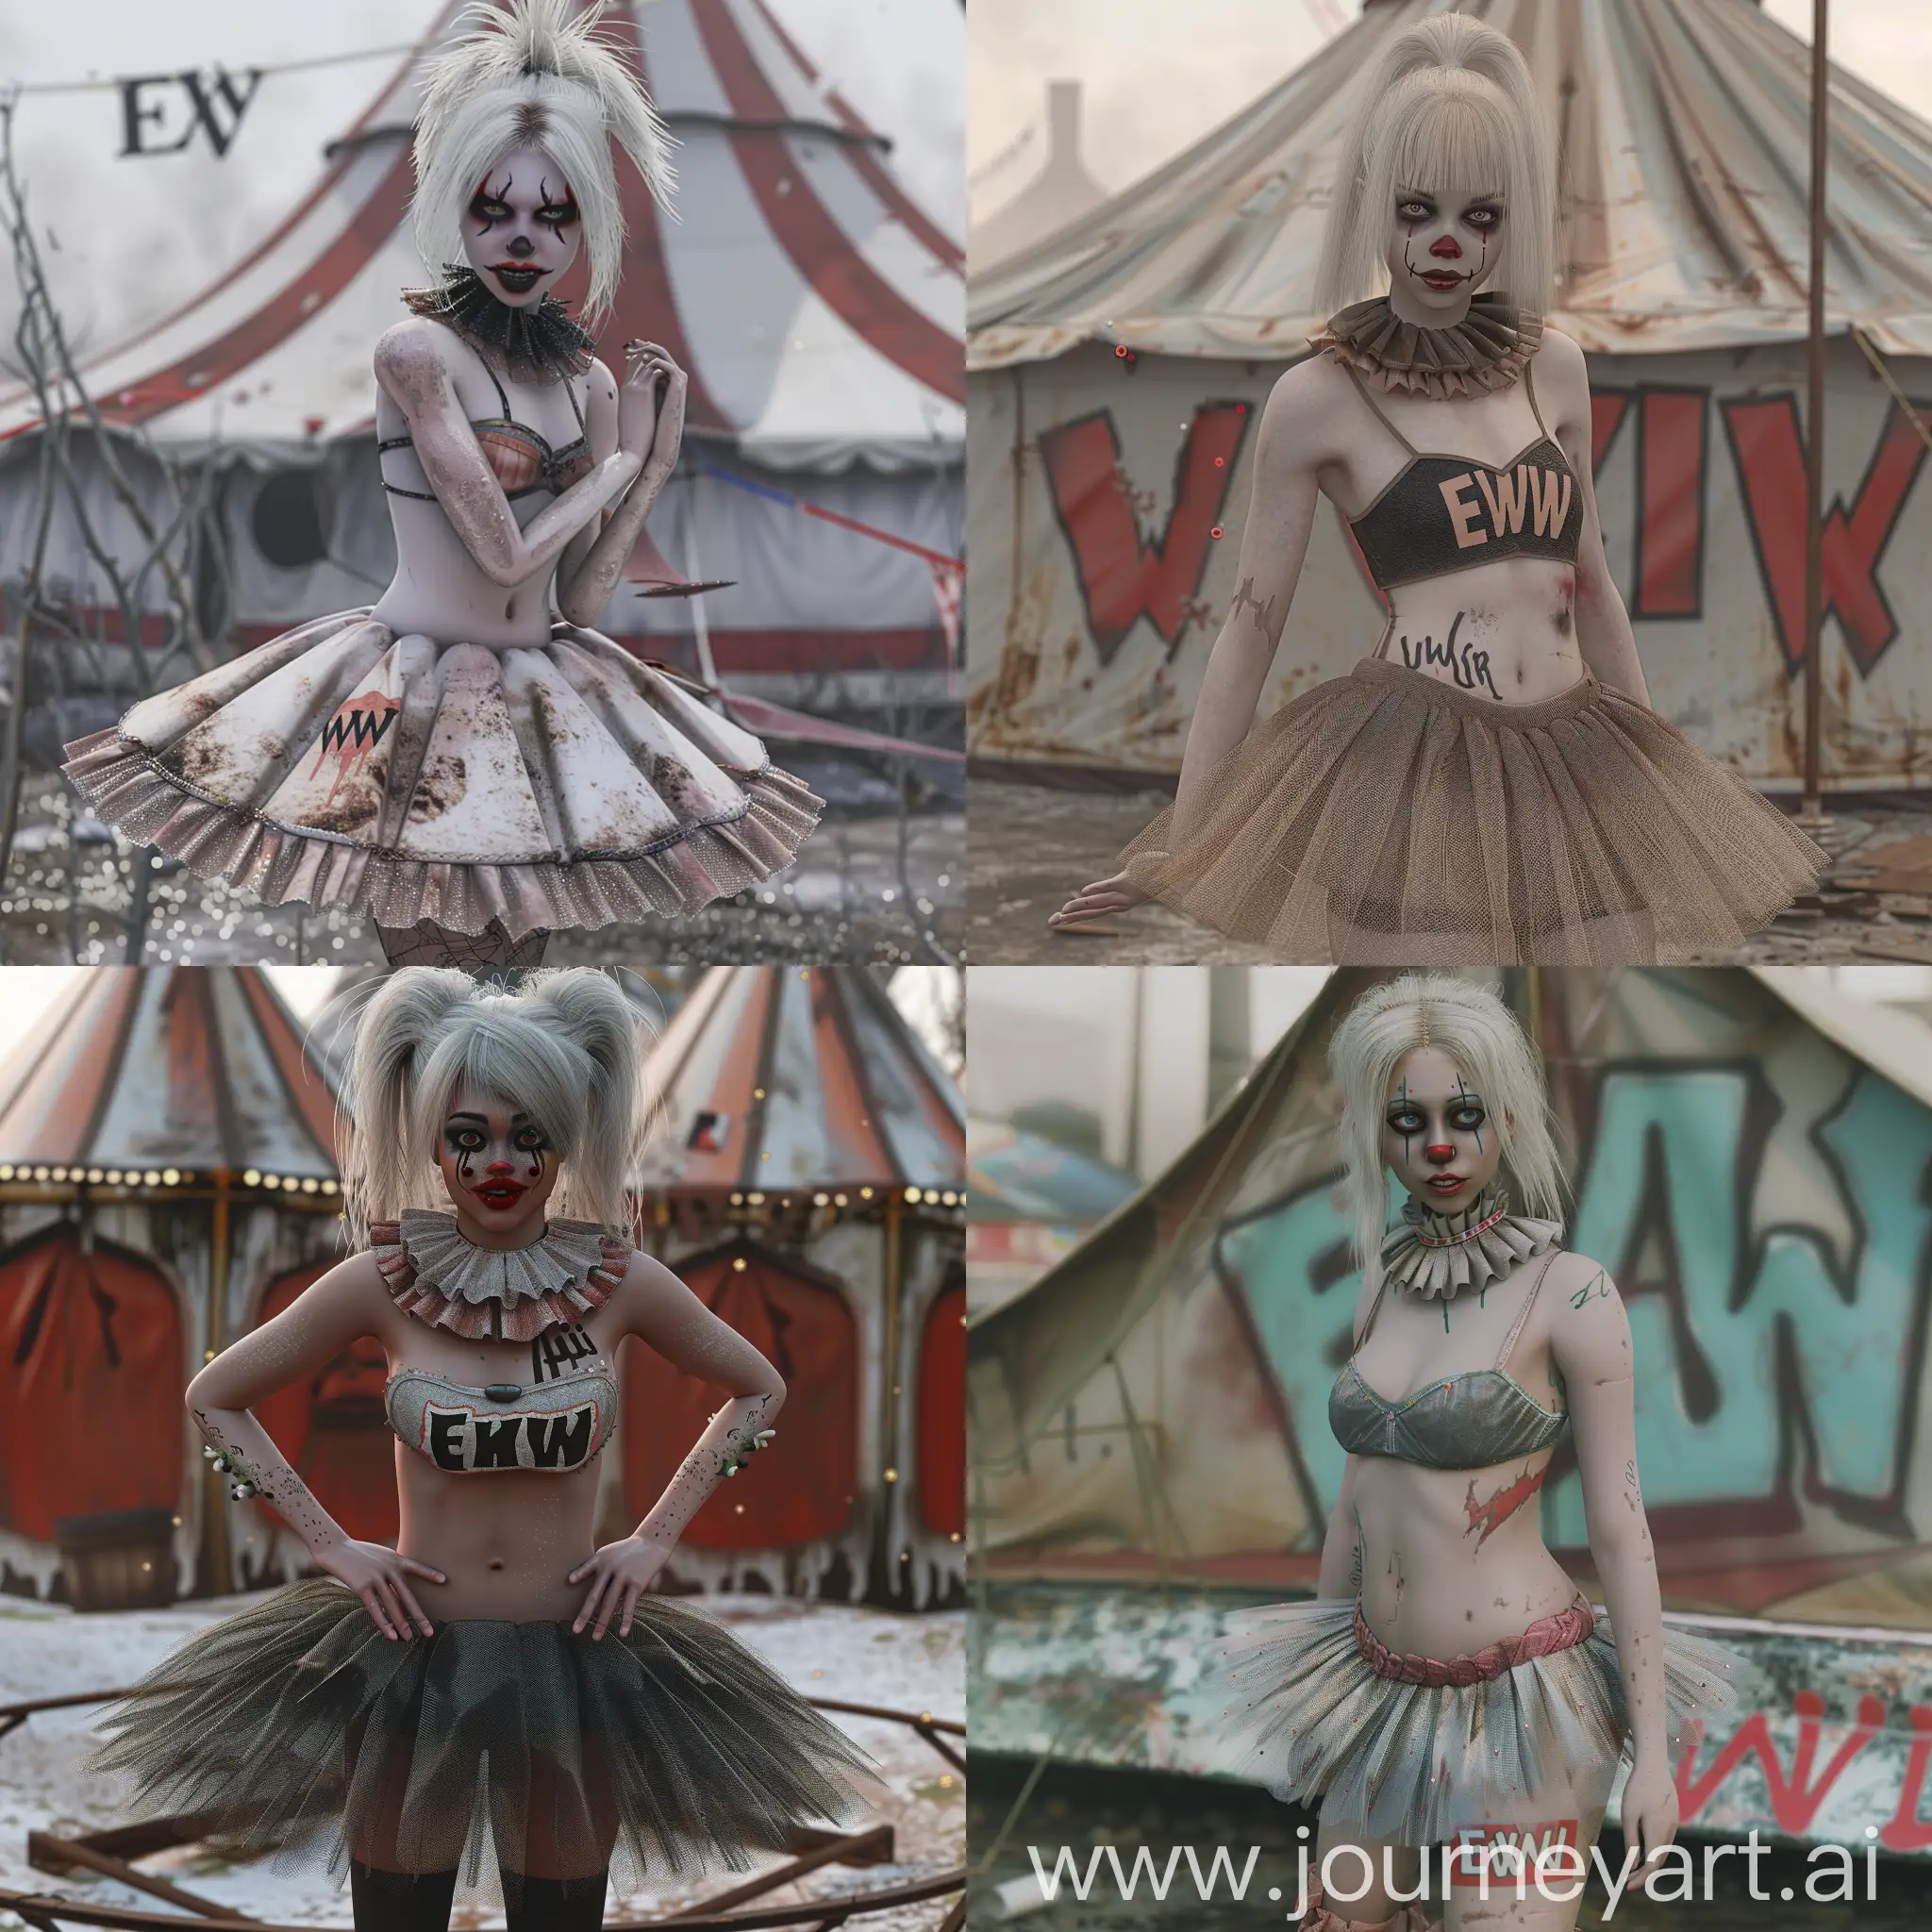 Ethereal-WhiteHaired-Ballerina-in-Vintage-Tent